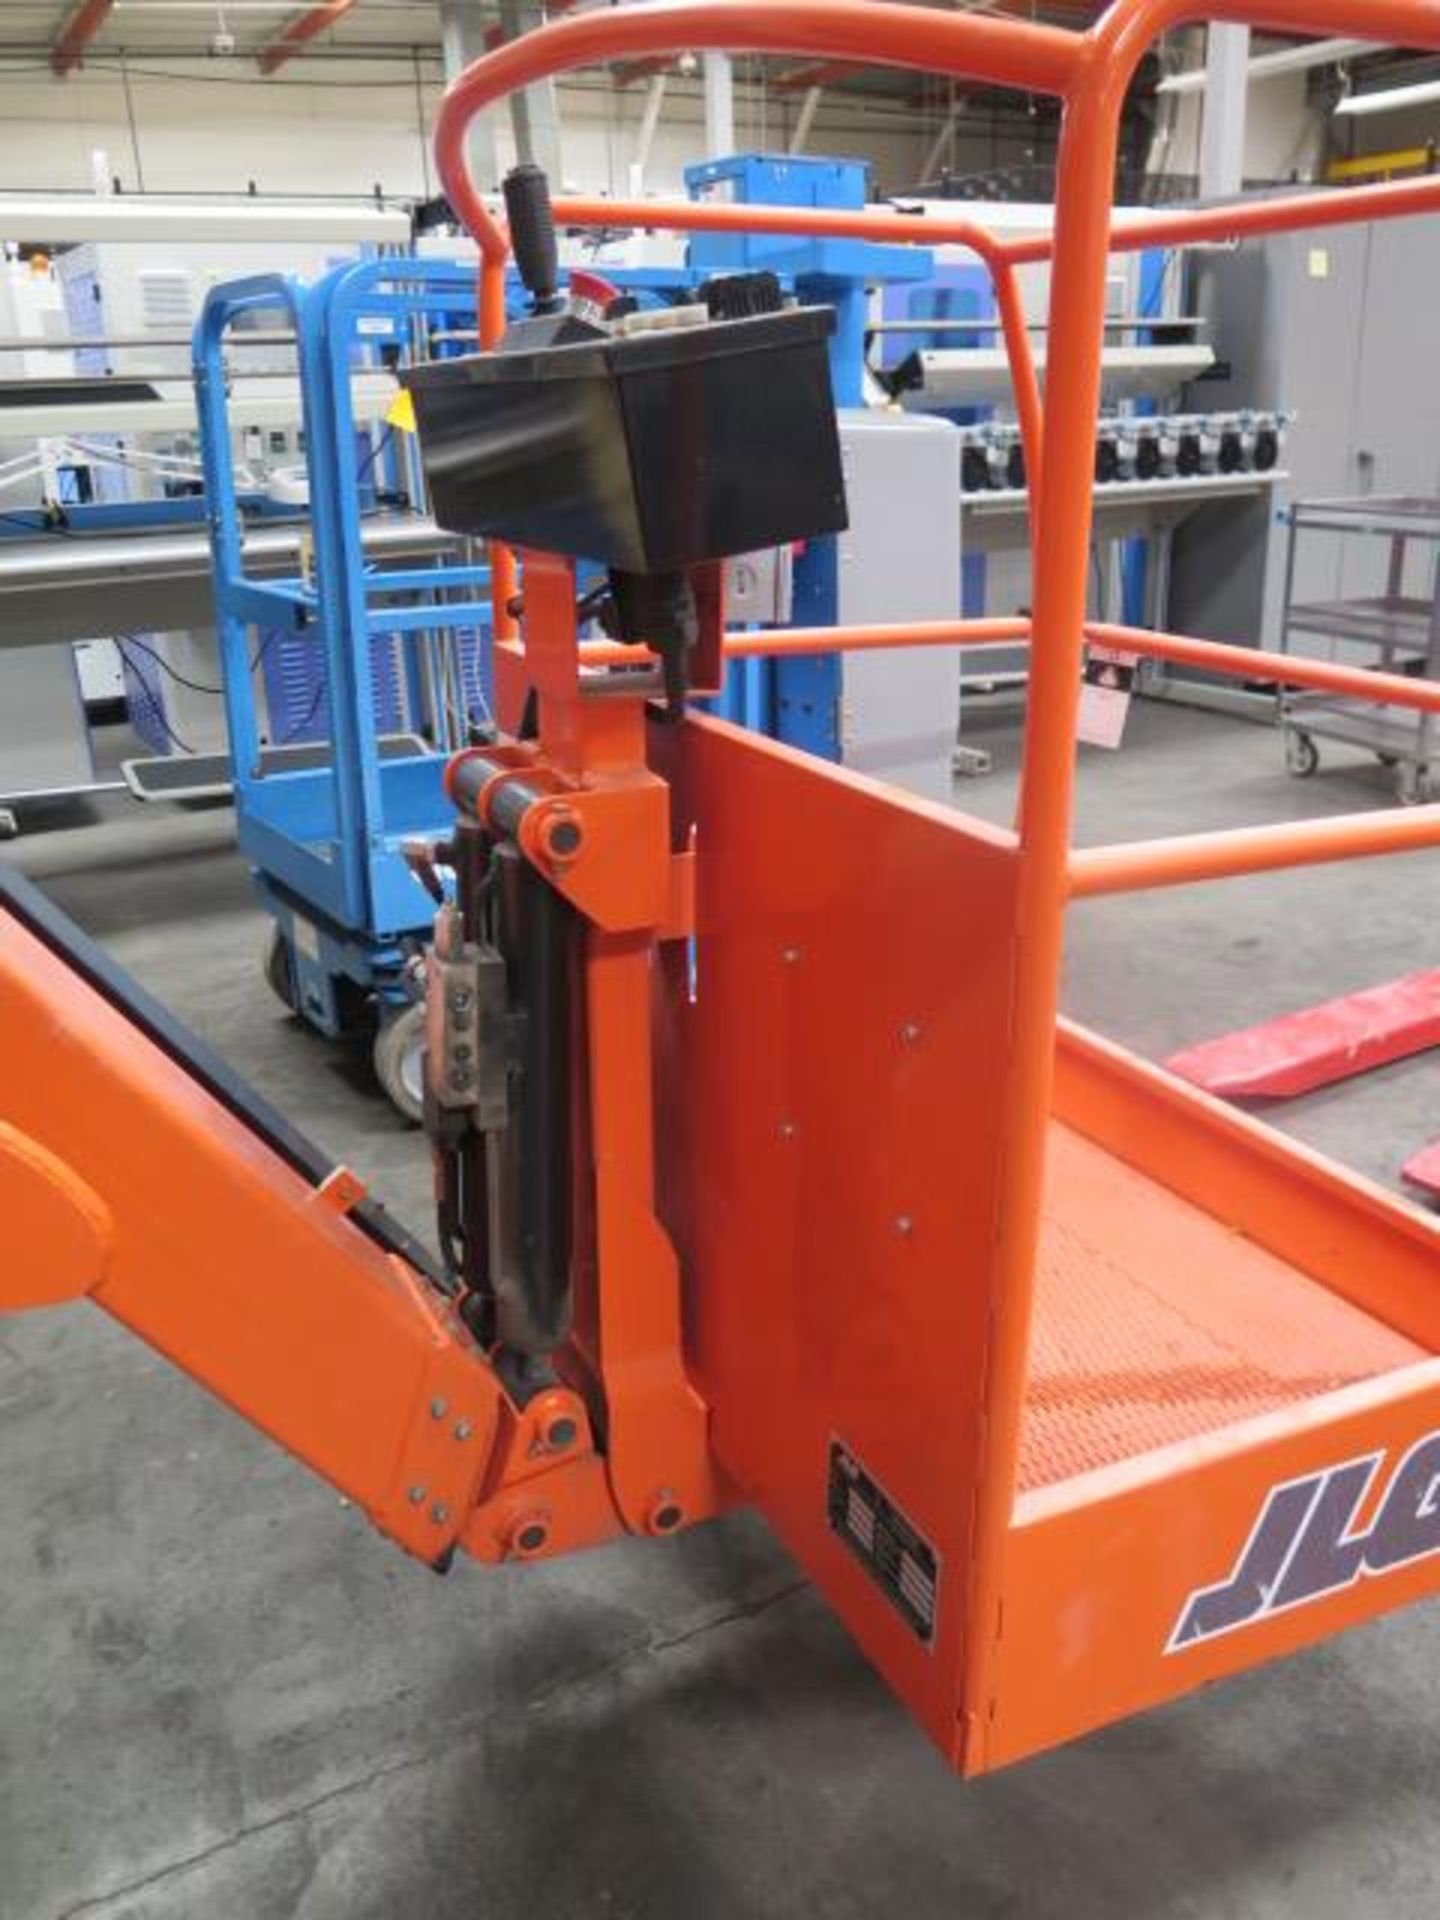 2013 JLG Toucan E33MJ Electric Boom Lift s/n A300052335 w/ 32.75' Max Platform Height, SOLD AS IS - Image 5 of 19